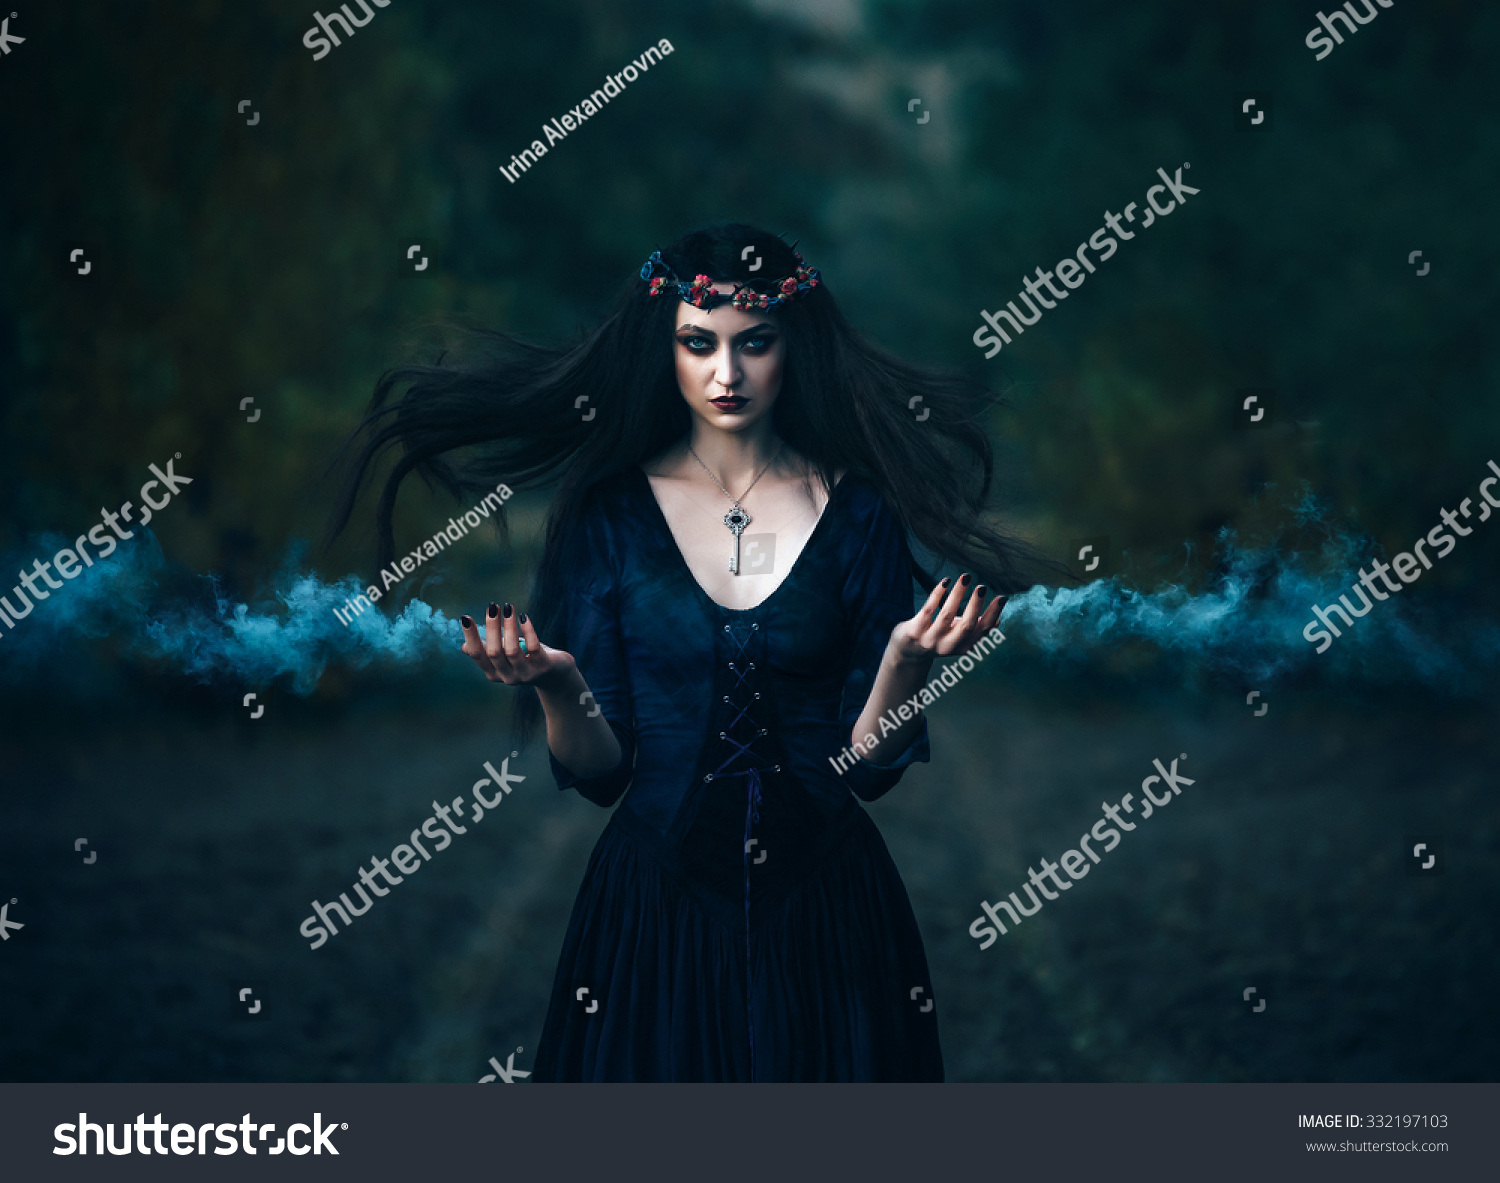 Fantasy horror woman witch medieval old purple outfit clothes dress. key on neck. Gothic magic portrait. Evil  makeup face Art scary Magician spell smoke hands. Hair flutter fly wind night forest road #332197103